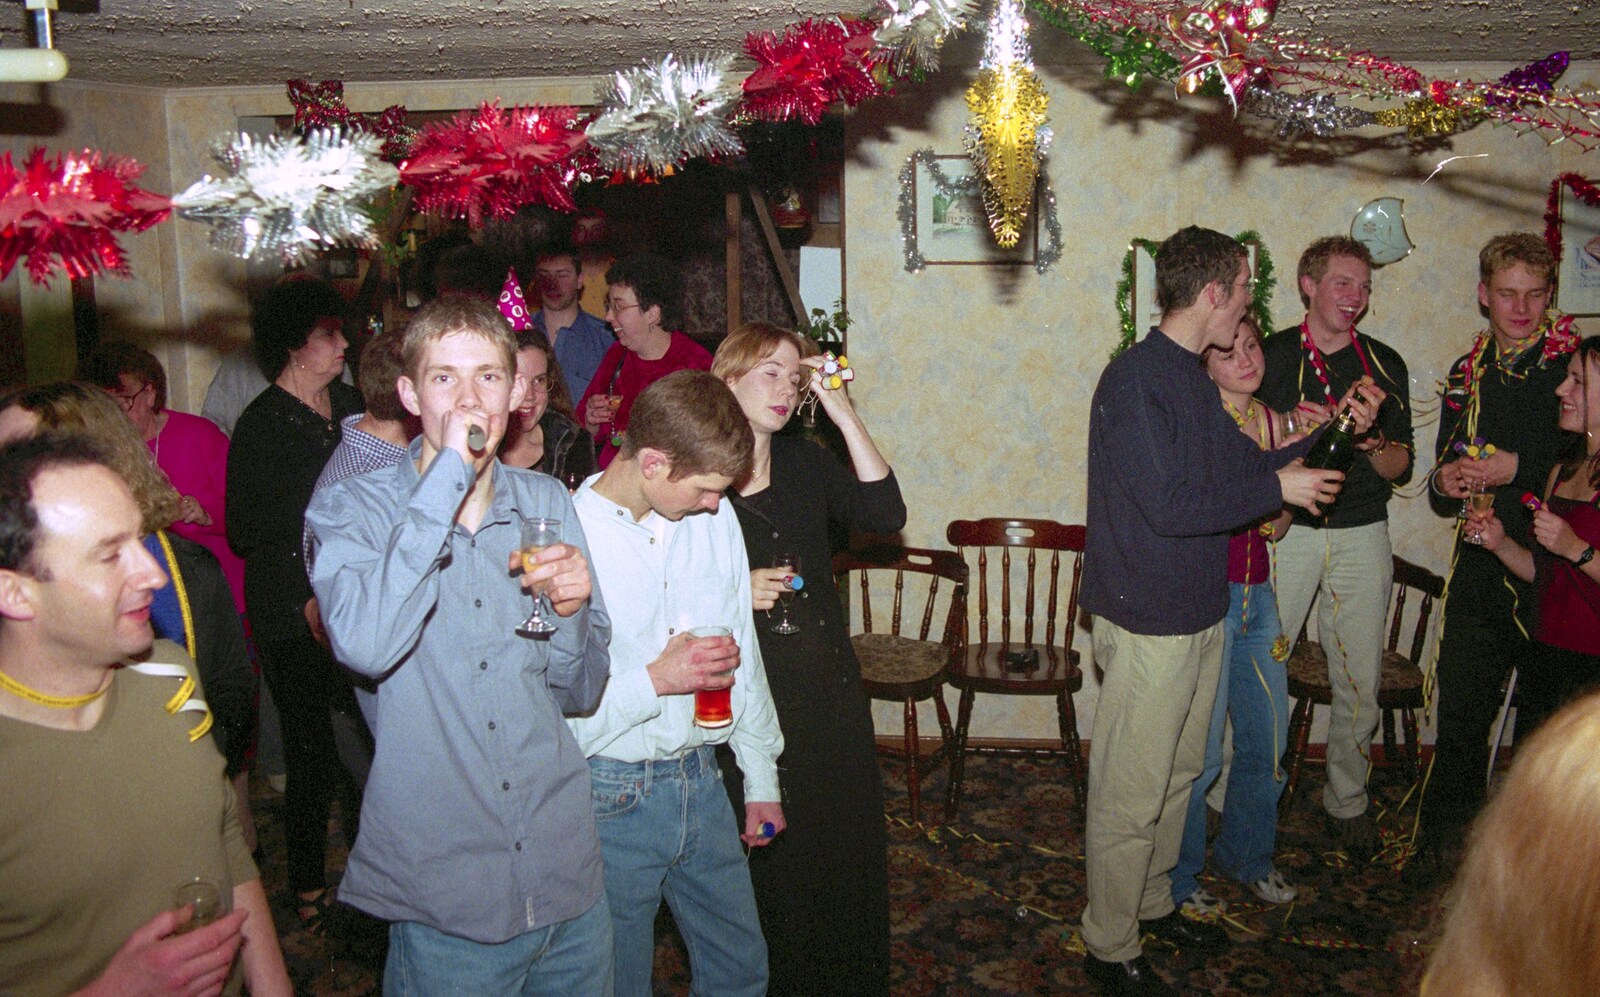 The Boy Phil's blowing a bit more from New Year's Eve at The Swan Inn, Brome, Suffolk - 31st December 1999